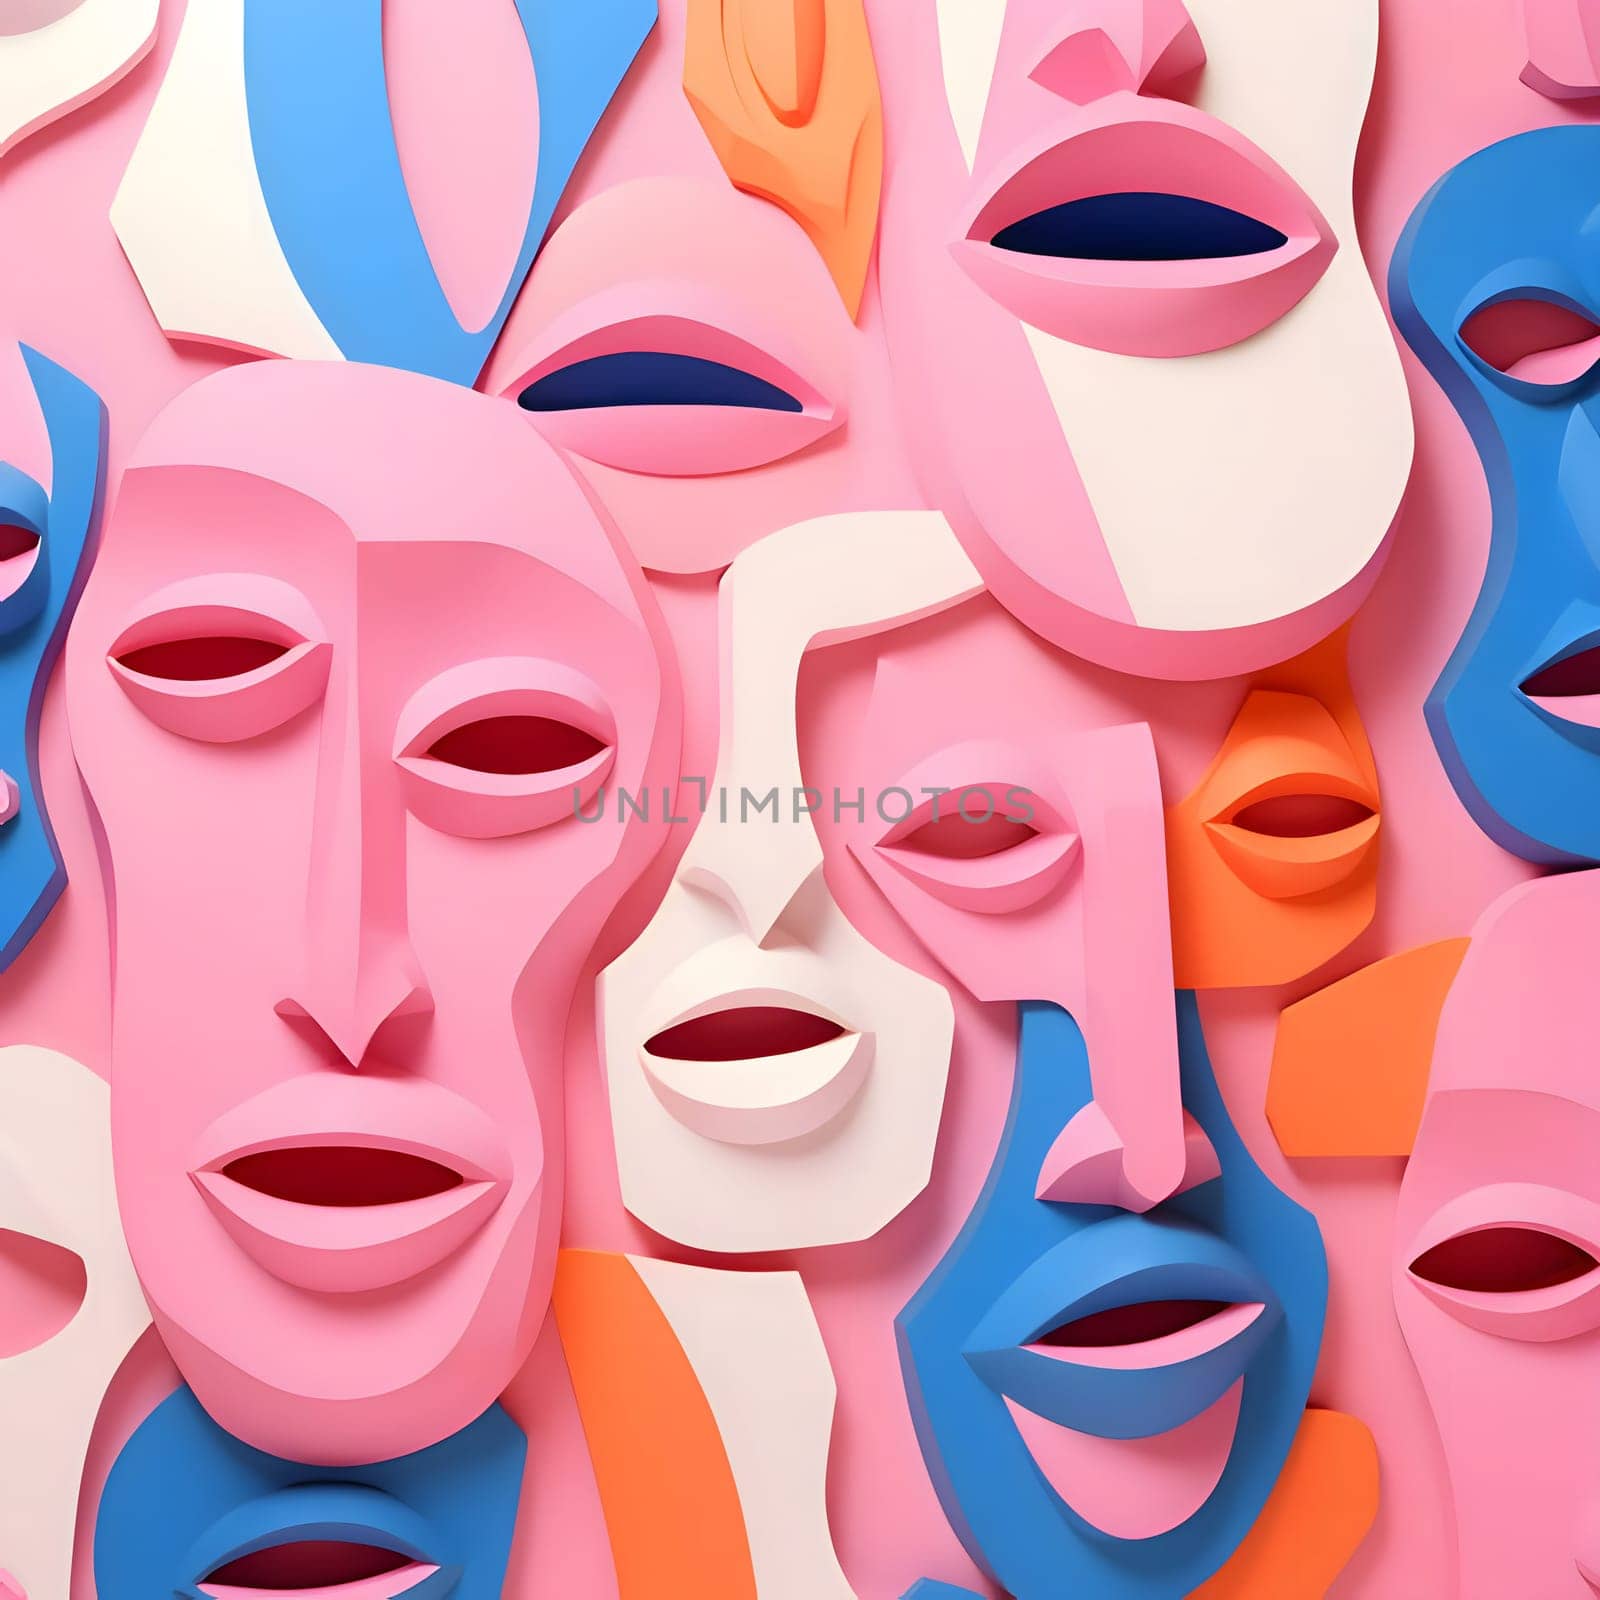 Patterns and banners backgrounds: Seamless pattern with colorful masks. 3d render illustration.